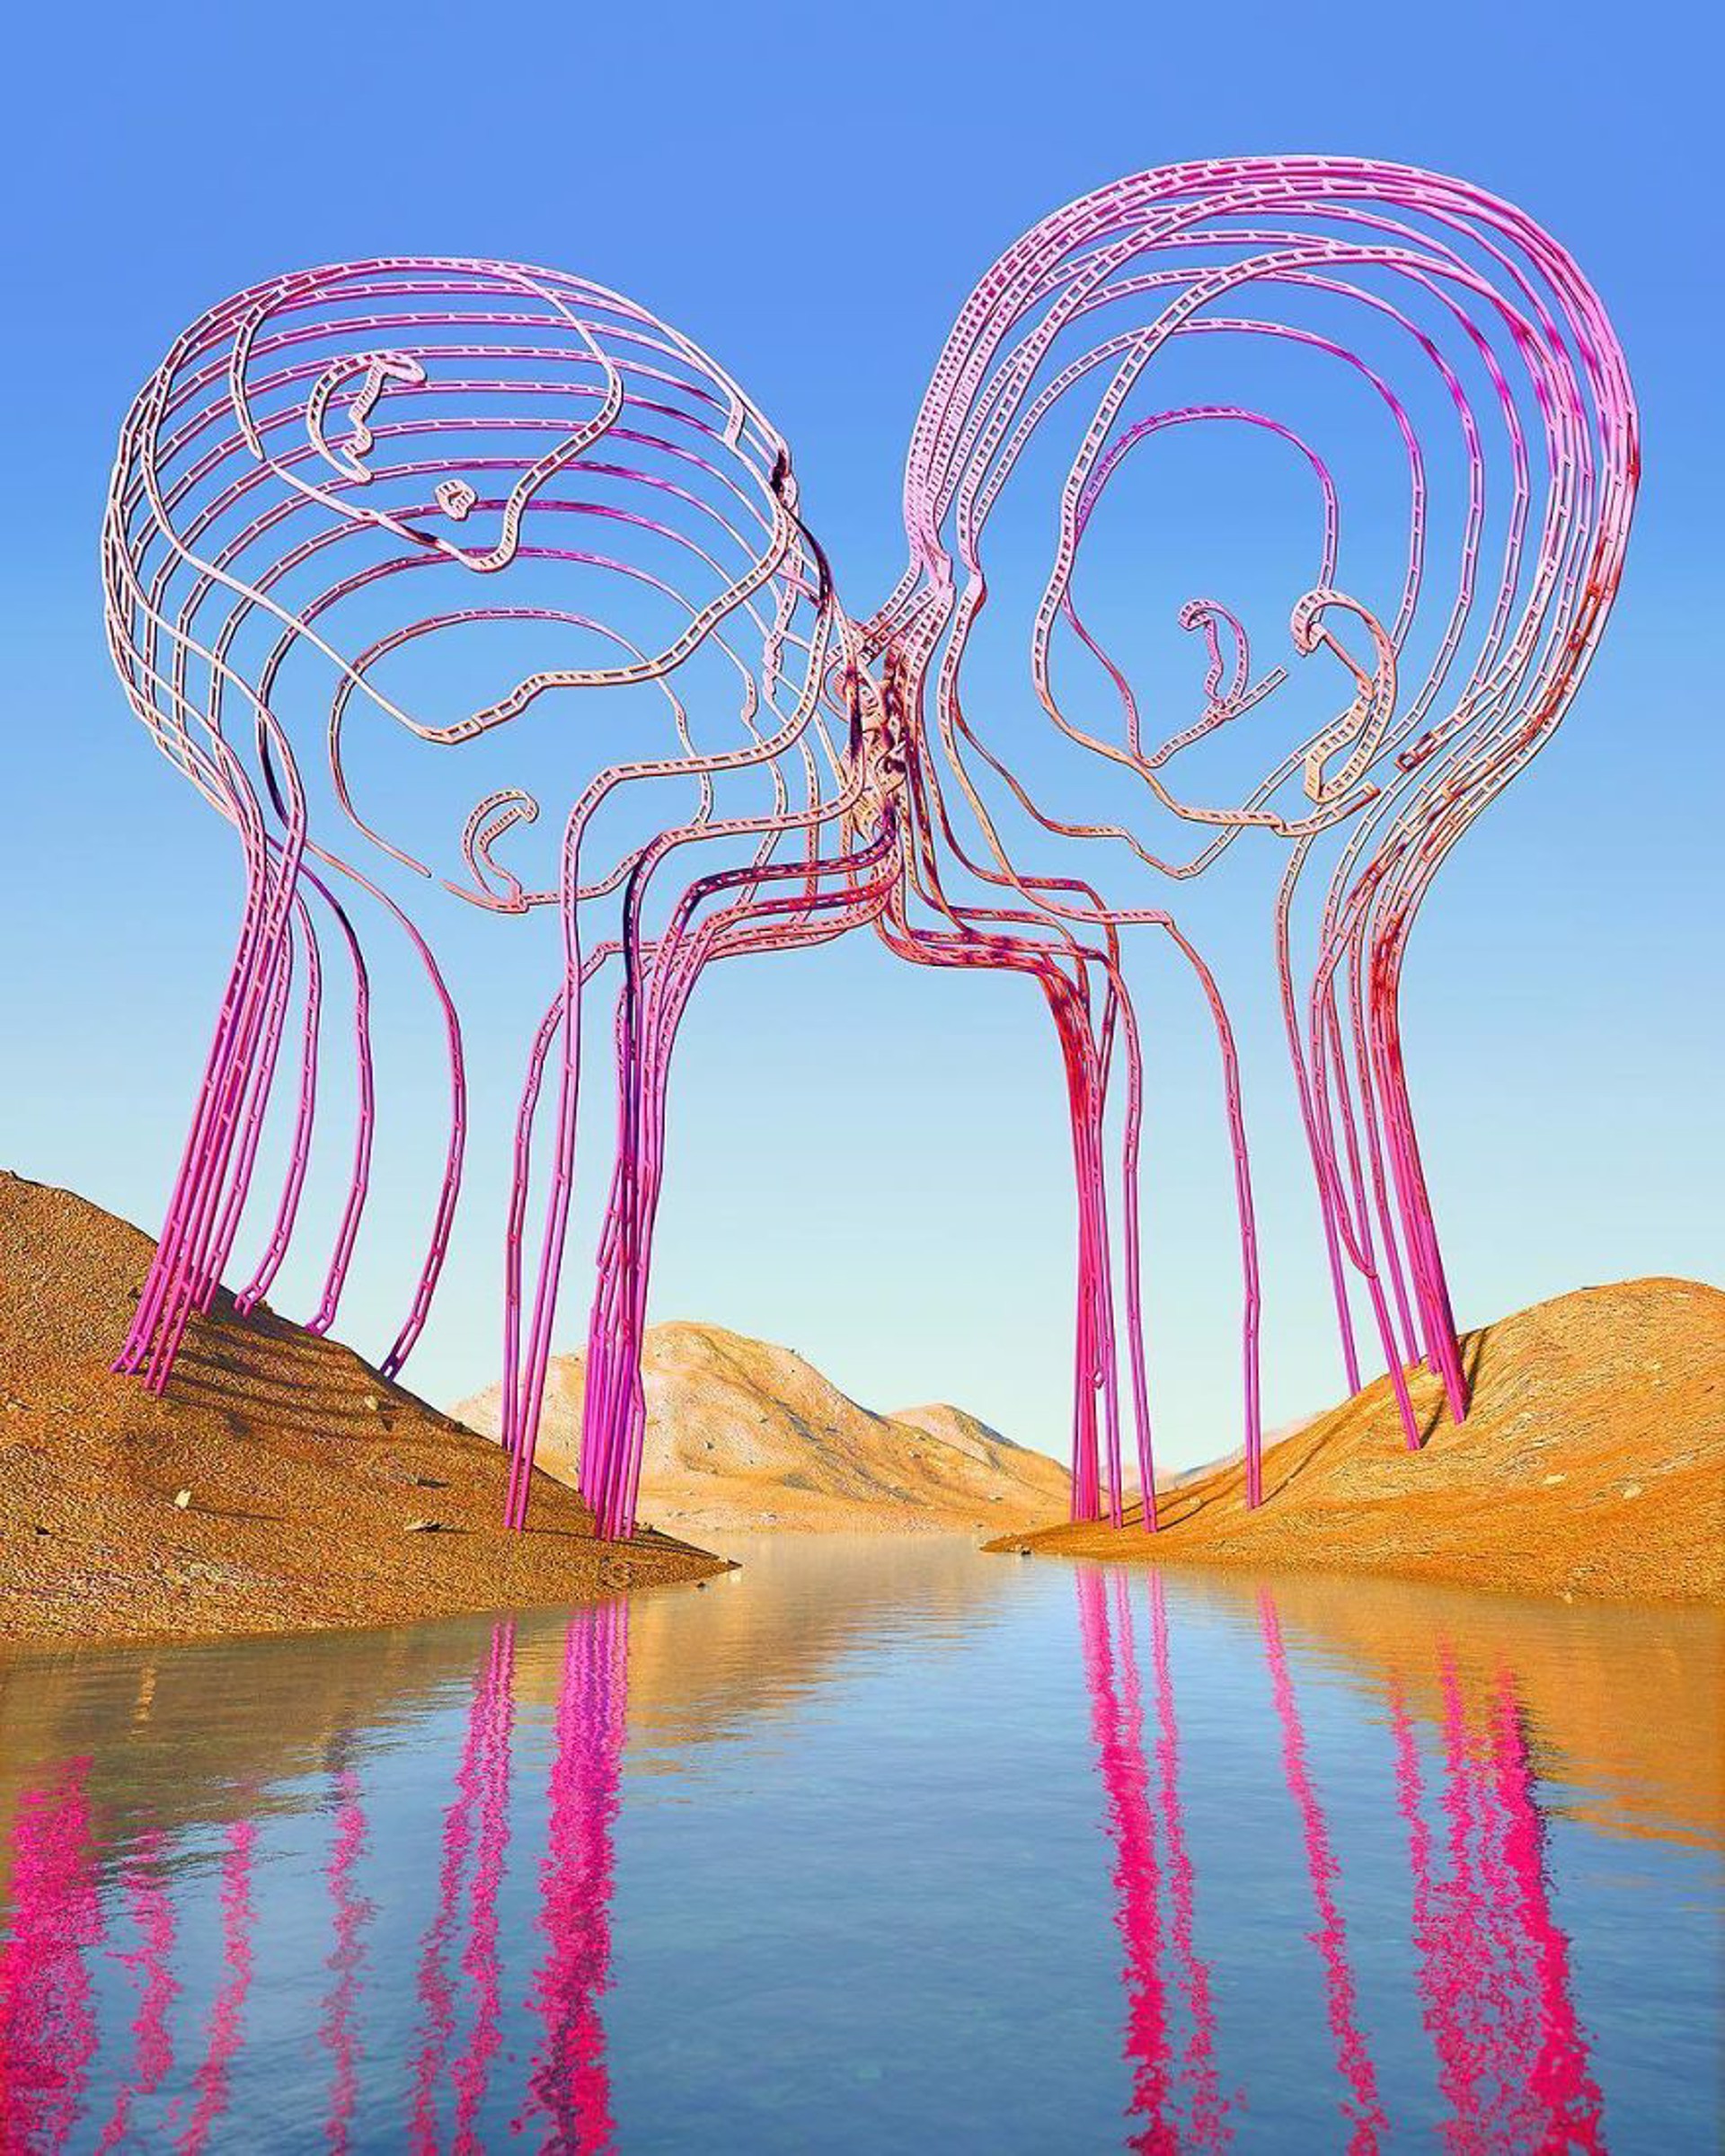 Borderless (other sizes available upon request) by Chad Knight